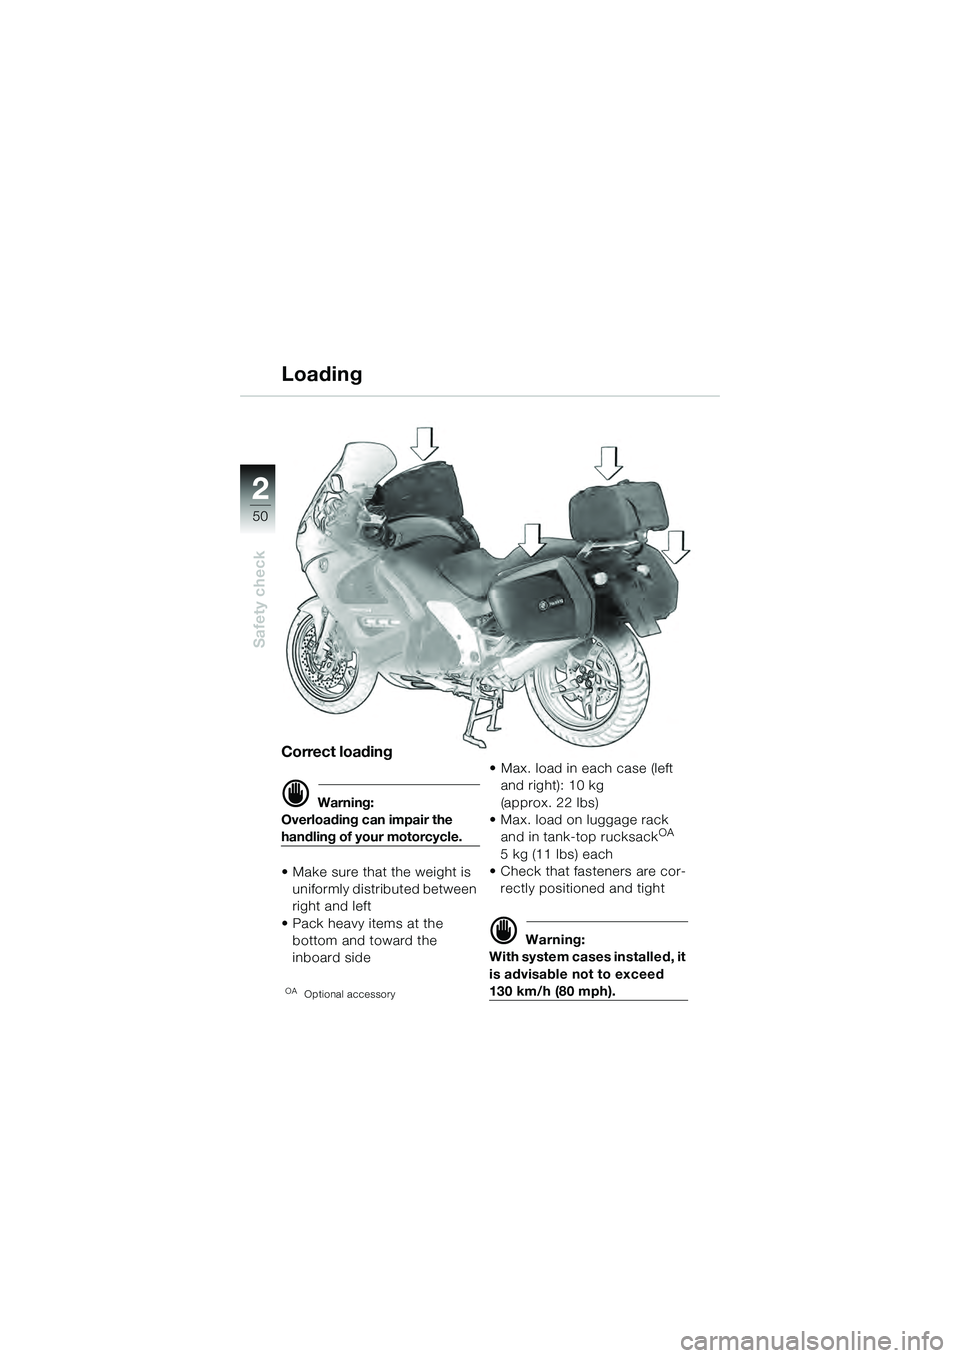 BMW MOTORRAD K 1200 GT 2004  Riders Manual (in English) 50
Safety check
2
Correct loading
 Warning:
Overloading can impair the 
handling of your motorcycle.
• Make sure that the weight is  uniformly distributed between 
right and left
• Pack heavy ite